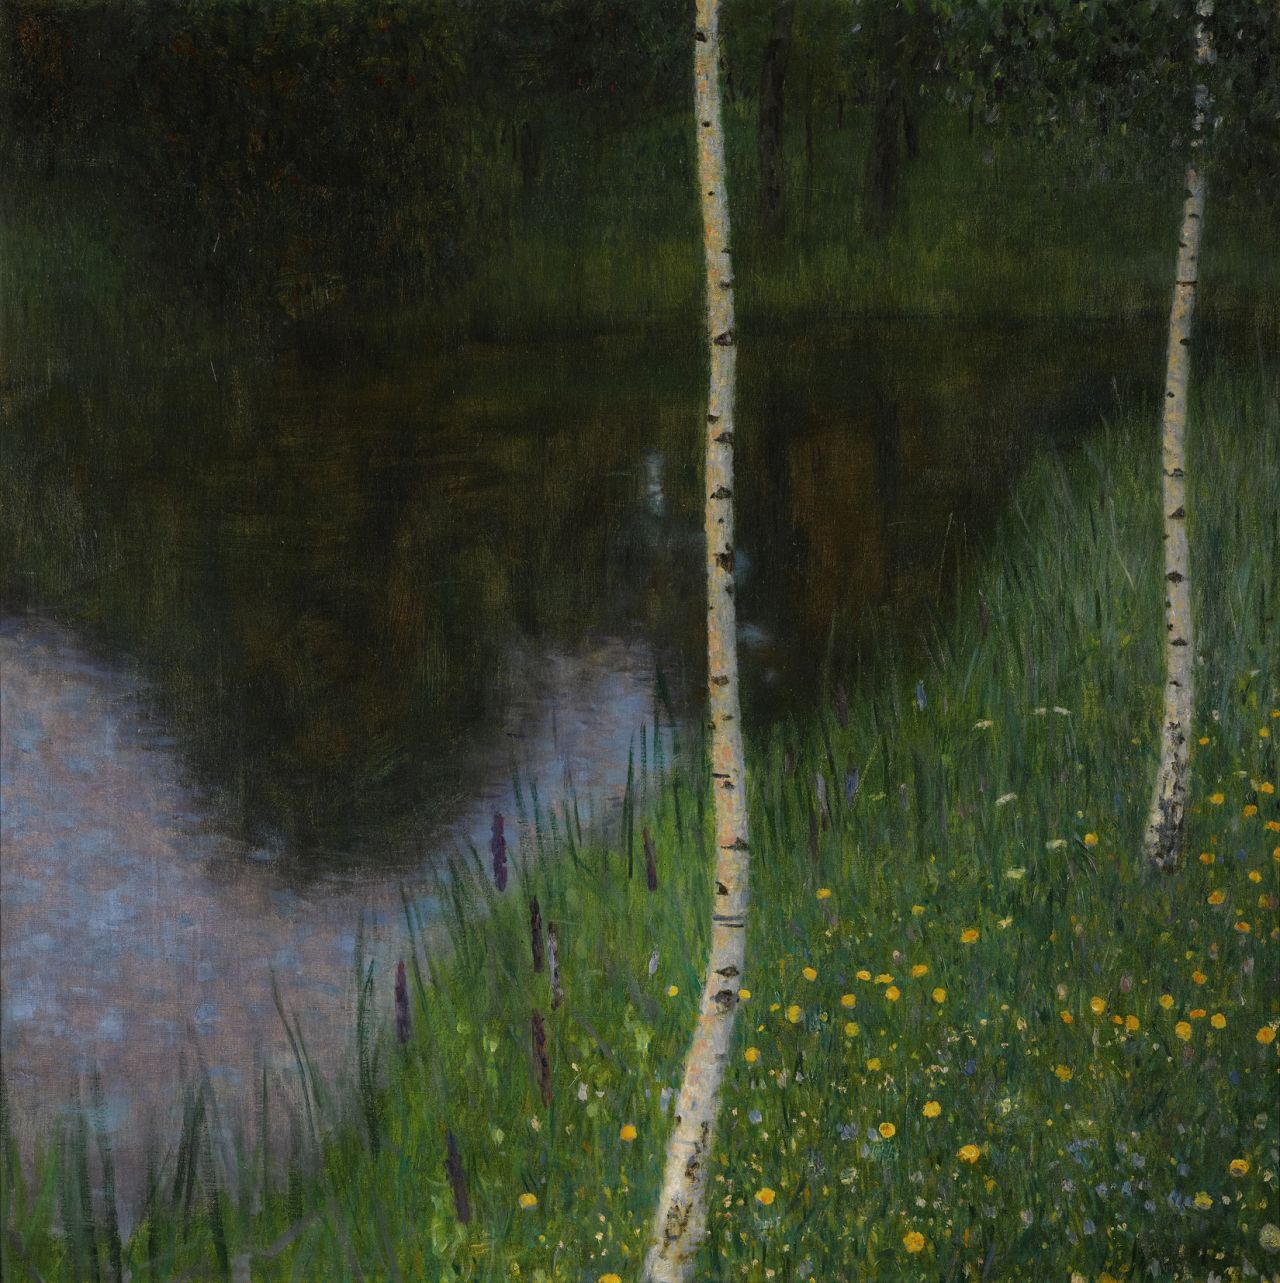 "Lakeshore with birches," by Gustav Klimt, 1901, is also being offered up for sale at Sotheby's. It is estimated to sell for between $9.5 million and $13 million. 